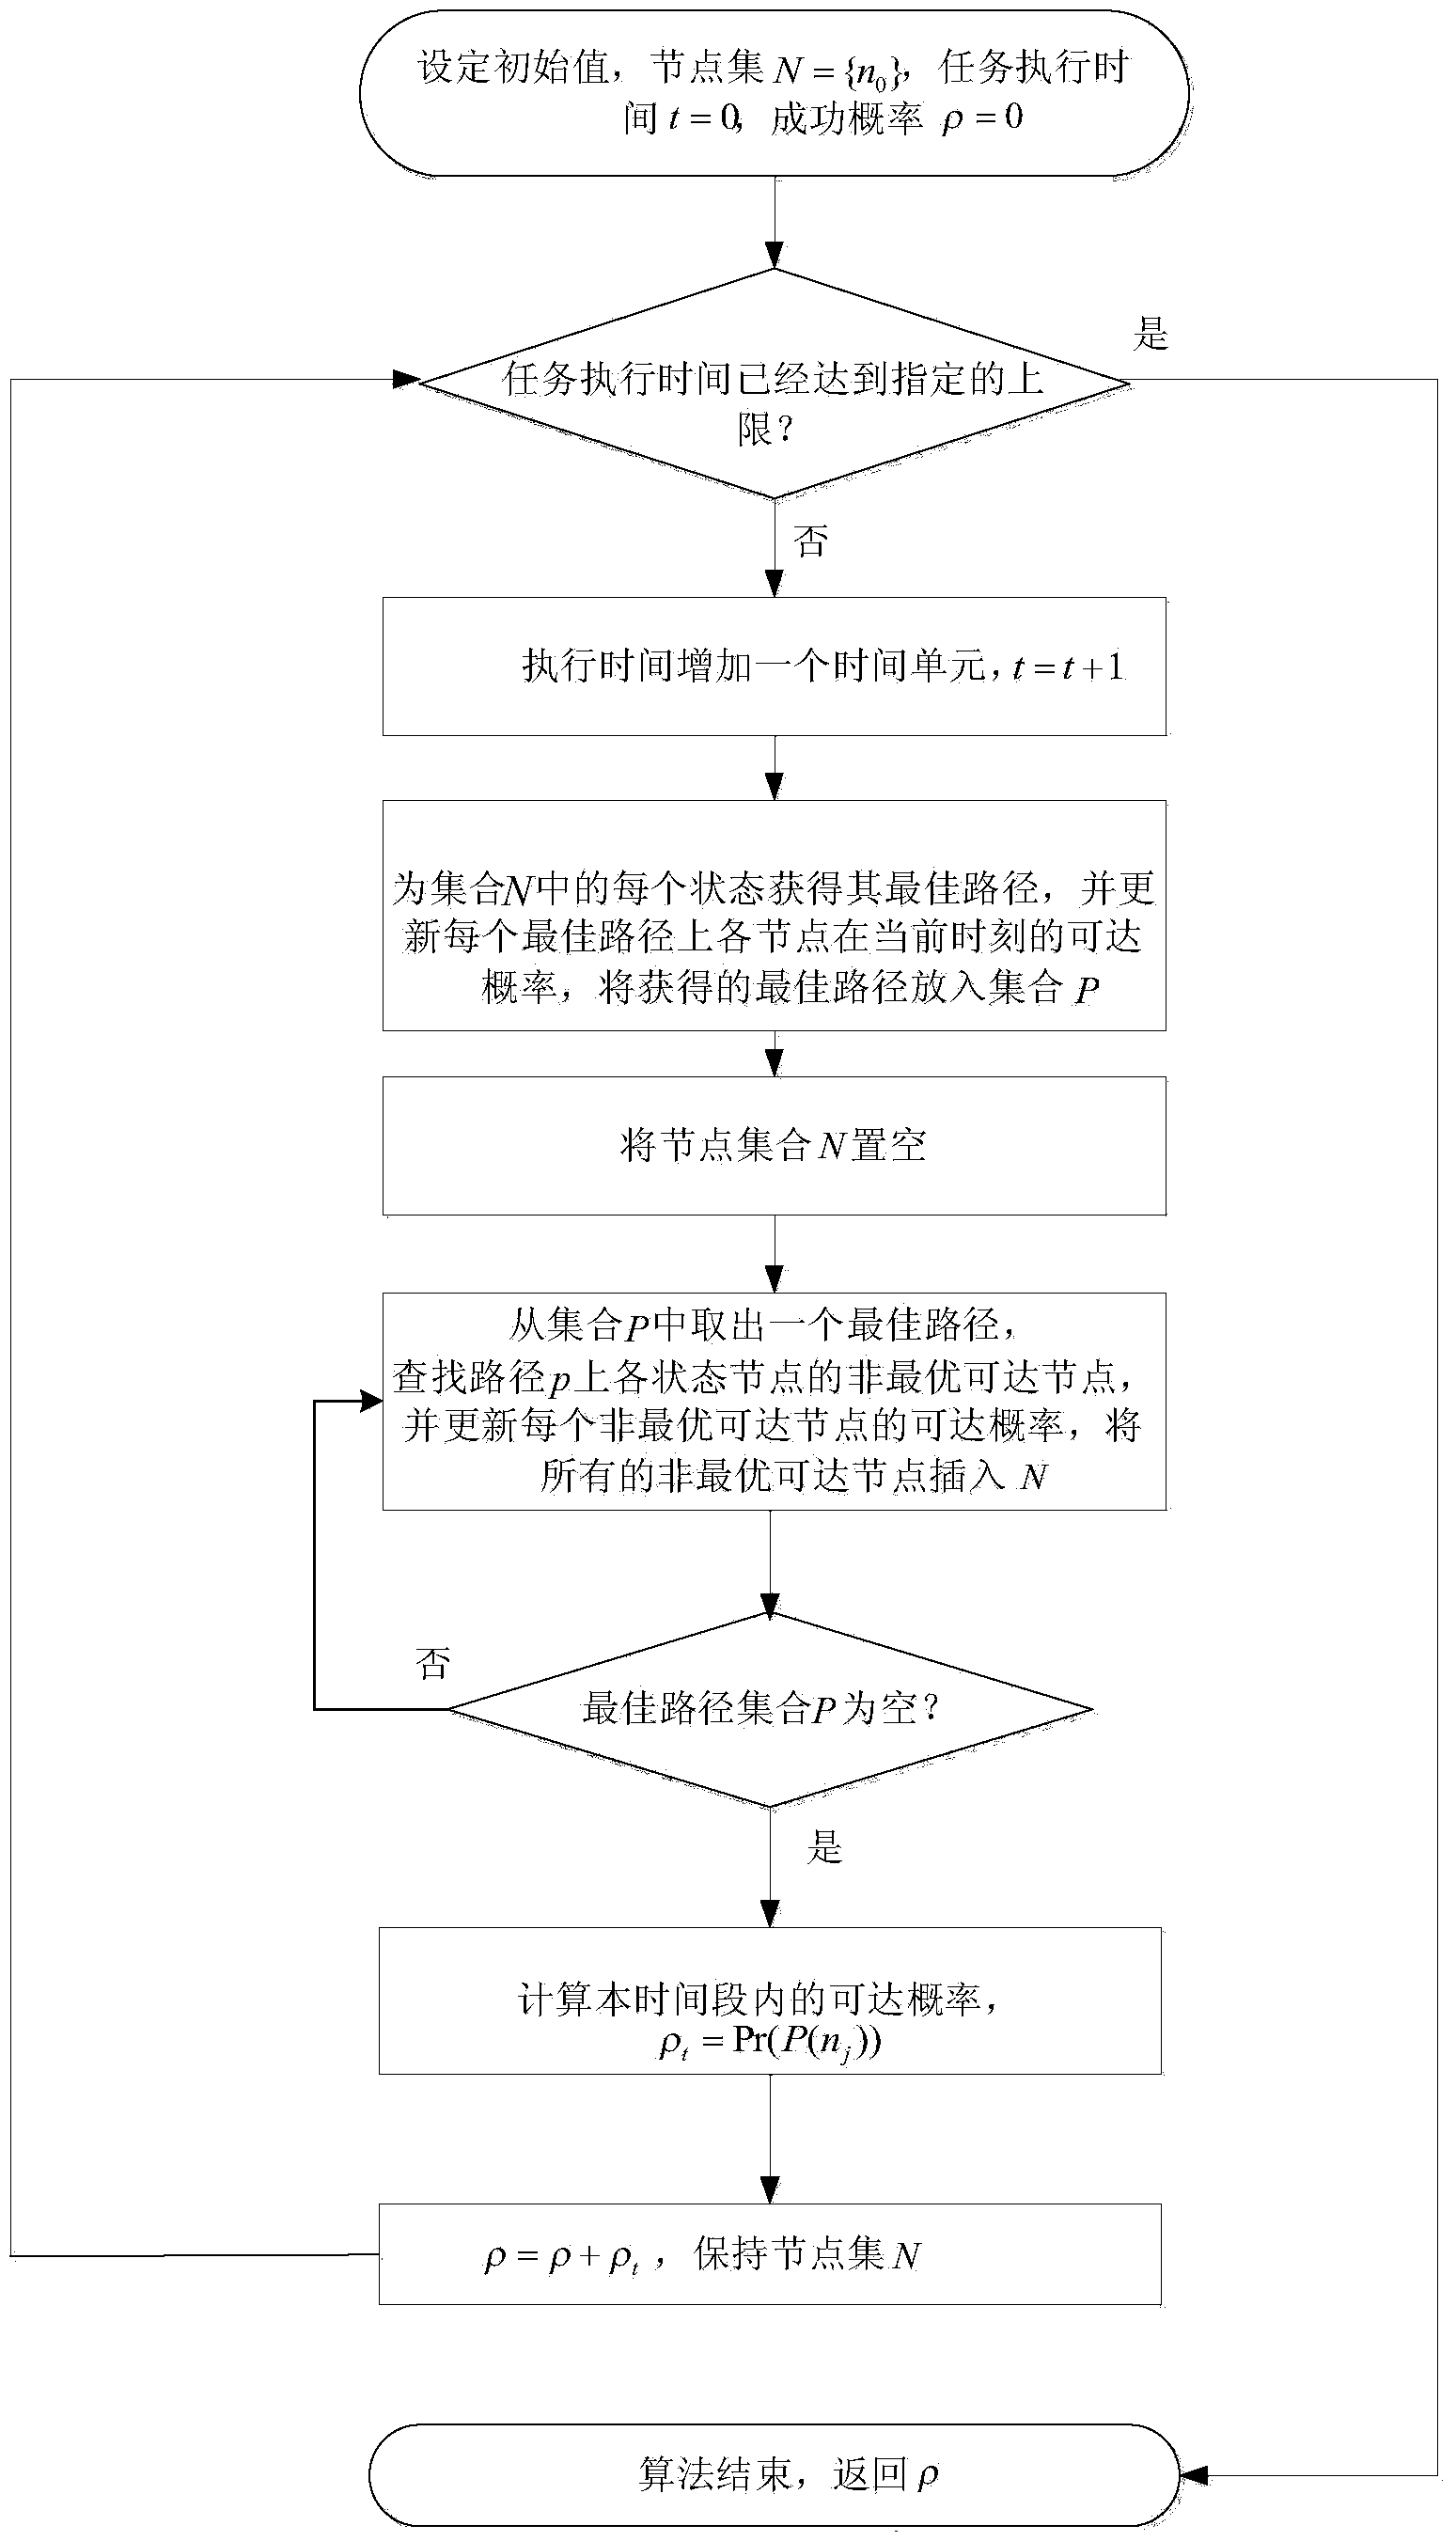 Measuring and risk evaluation method of executive capability of scheduled task